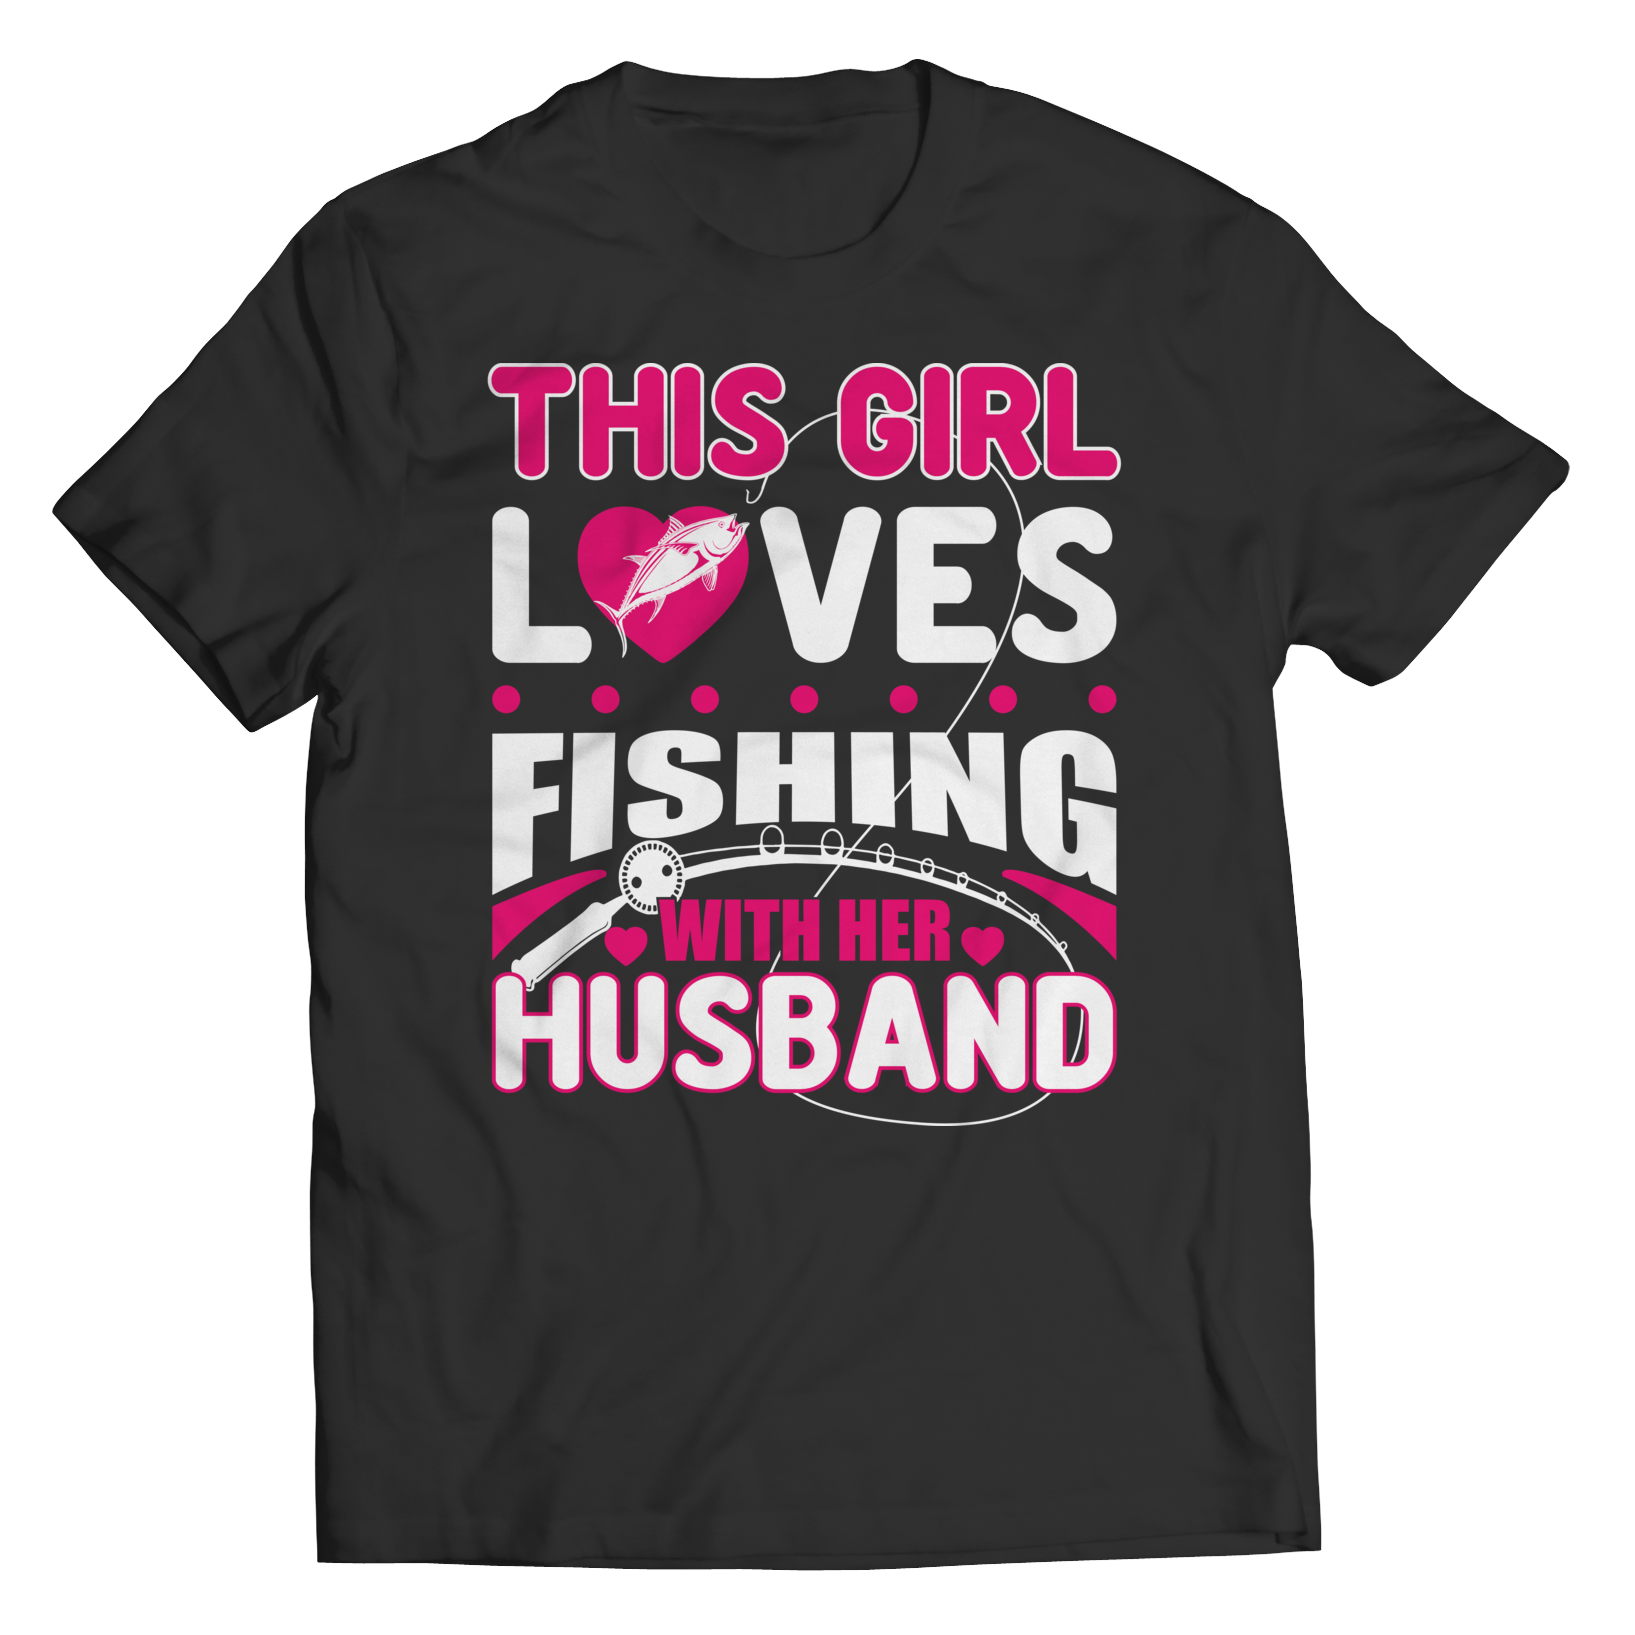 Limited Edition! Do you love fishing with your Husband